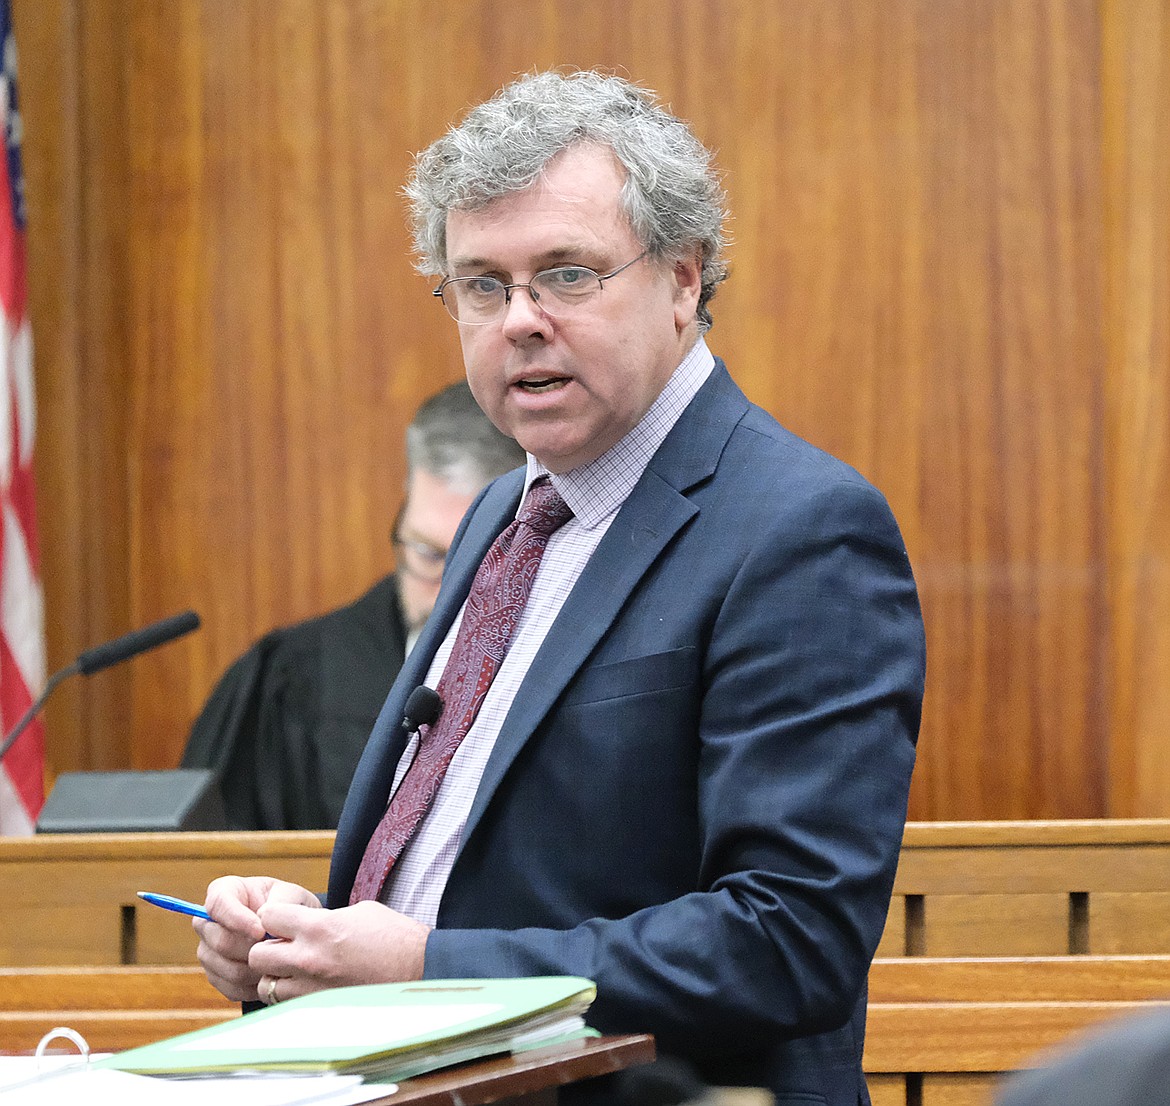 Attorney Sean Hinchey addresses the jury at Darrel "DC" Orr's assault trail in Lincoln County District Court. (Paul Sievers/The Western News)